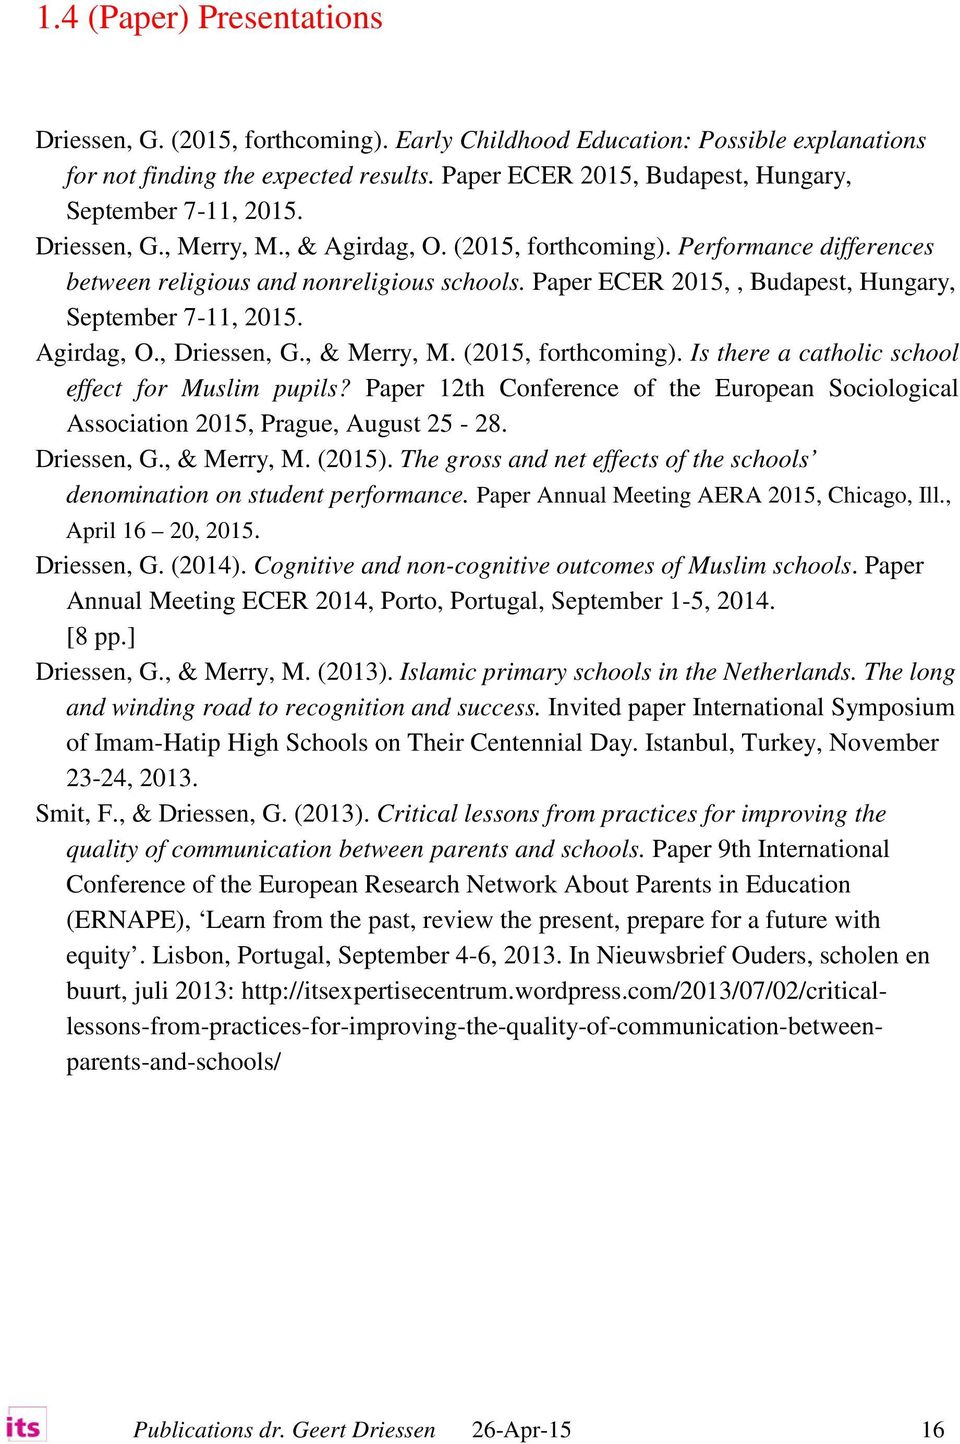 Paper ECER 2015,, Budapest, Hungary, September 7-11, 2015. Agirdag, O., Driessen, G., & Merry, M. (2015, forthcoming). Is there a catholic school effect for Muslim pupils?